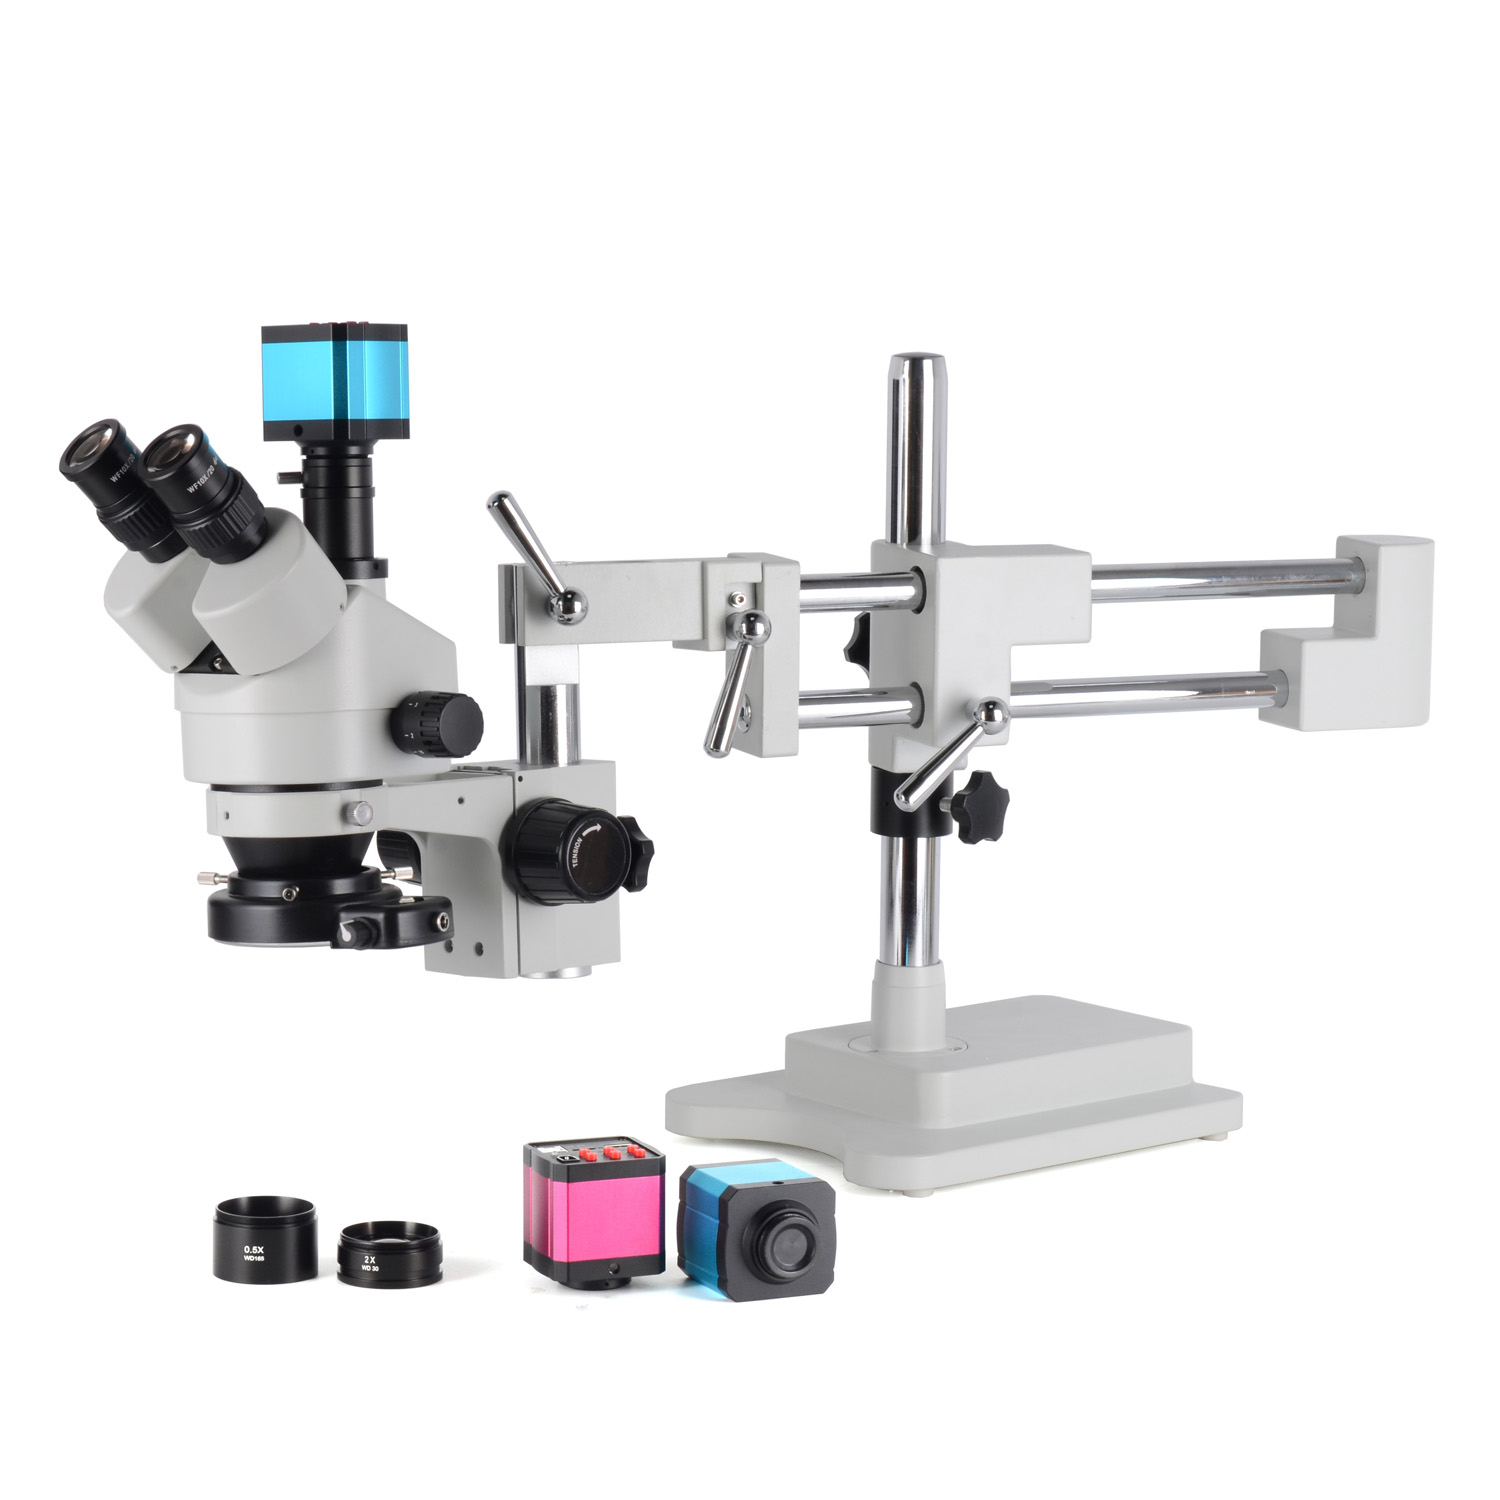 HD 14MP HDMI Industry Microscope Camera 3.5X-90X Simul-Focal Microscope Double Boom Stand Trinocular Stereo Zoom